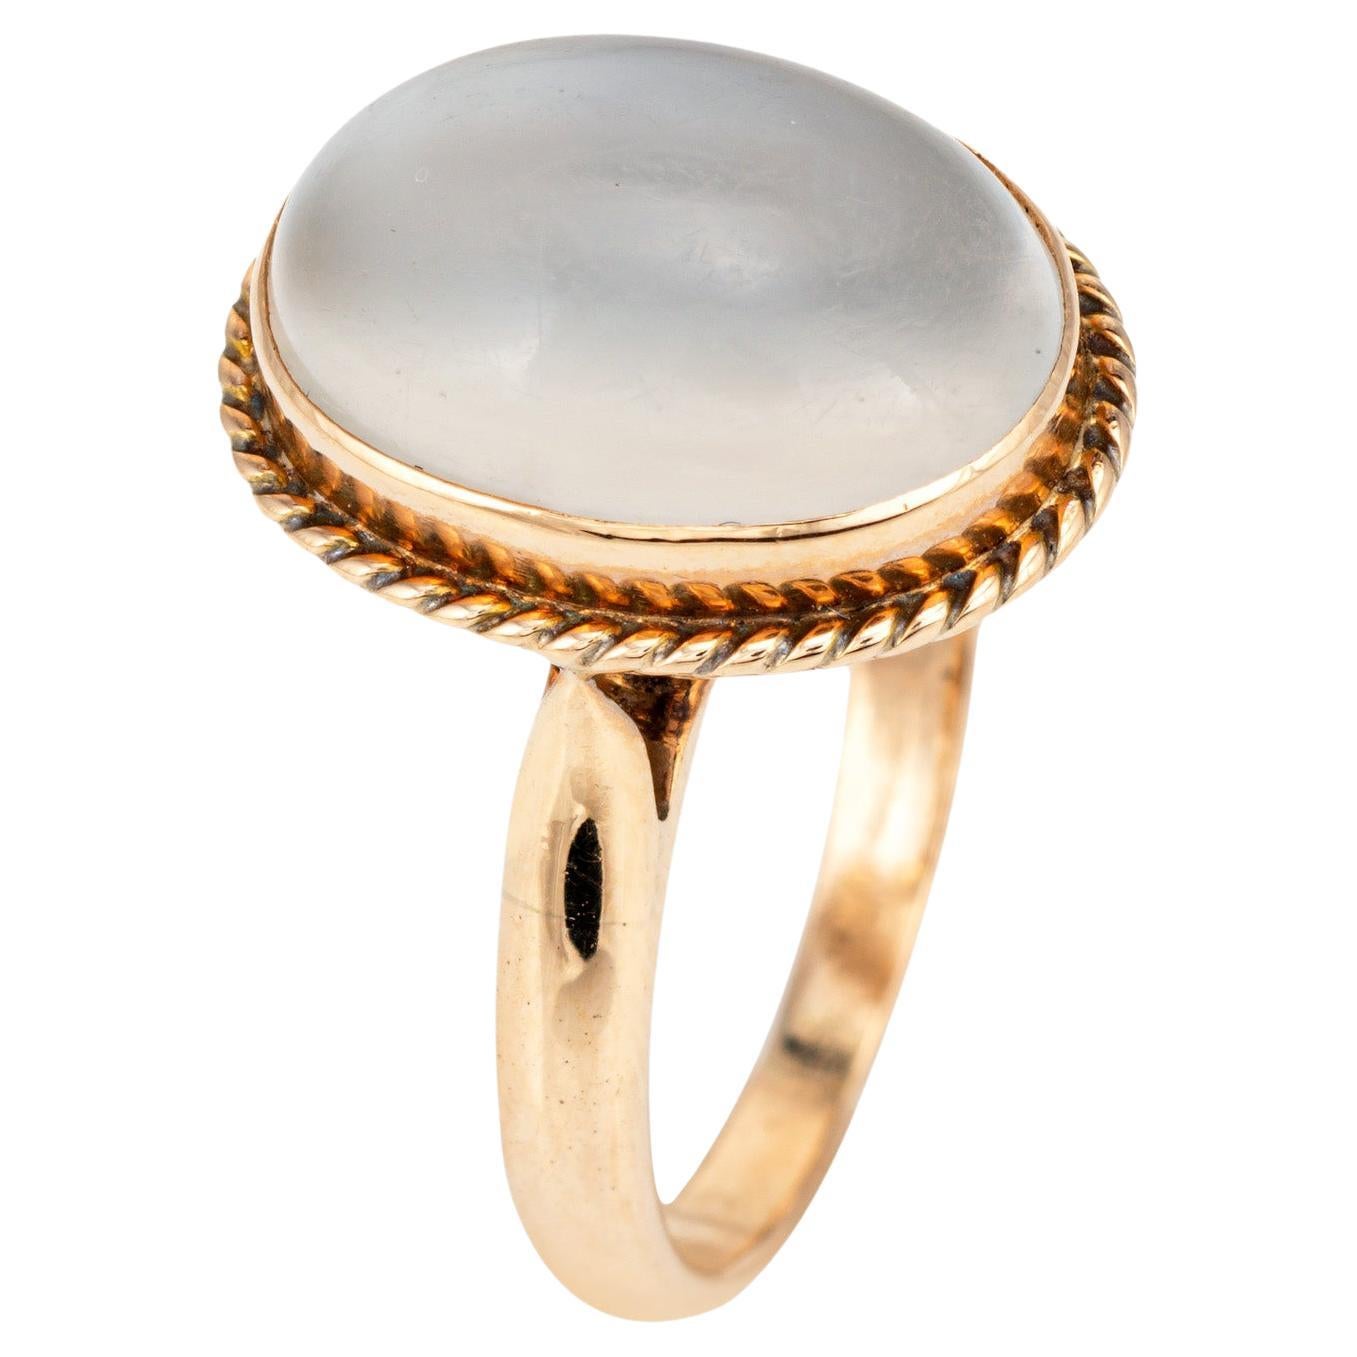 Vintage Moonstone Ring Mid Century 18k Yellow Gold 5.25 Oval Cocktail Jewelry 